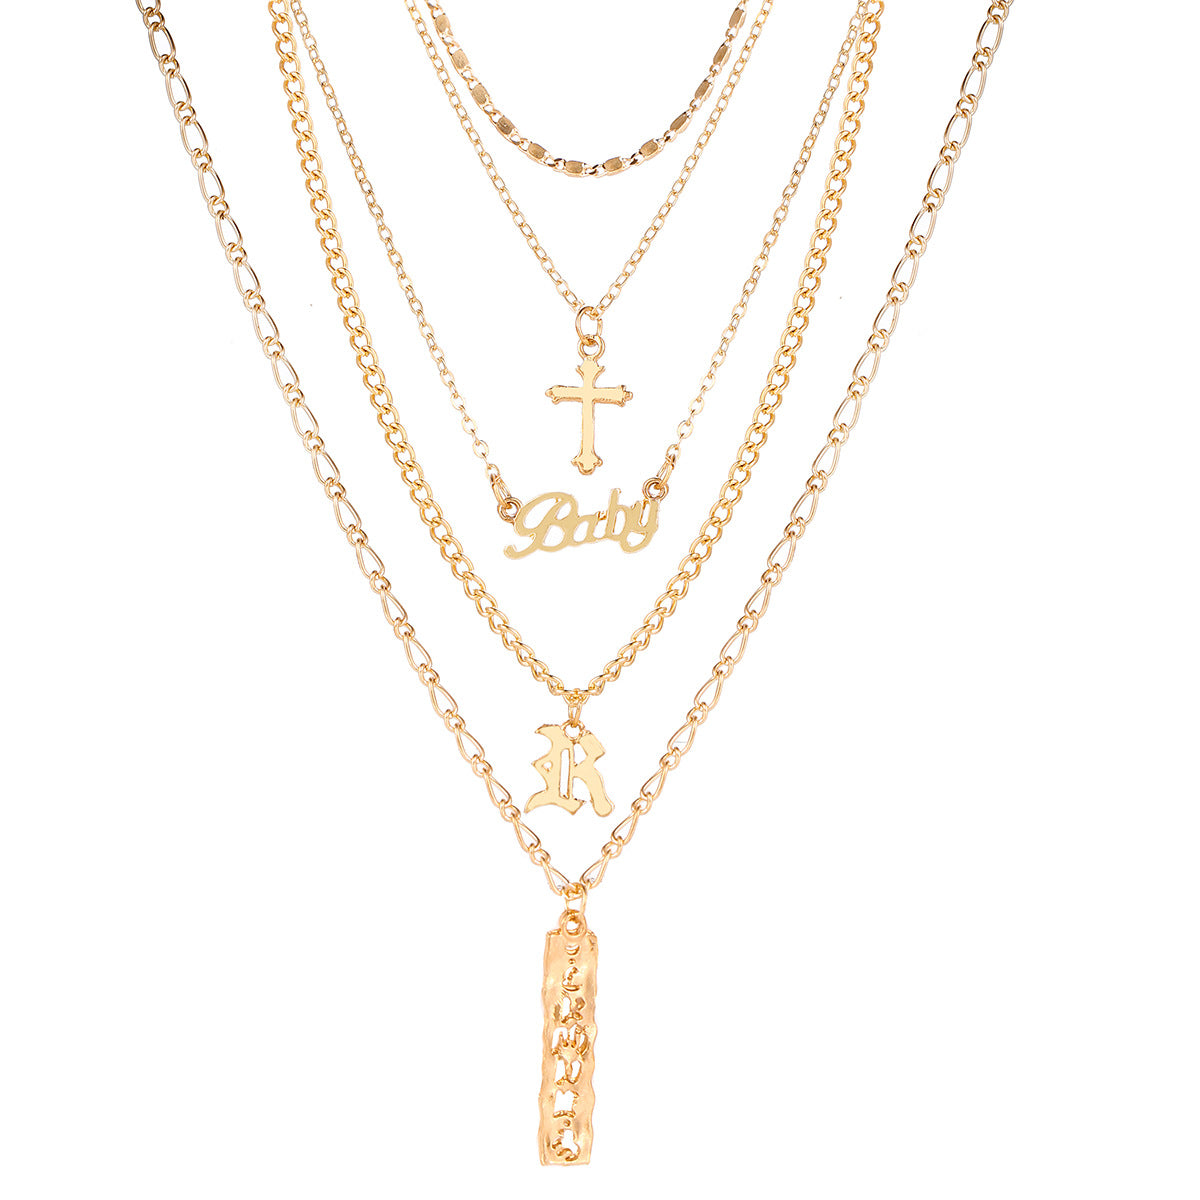 YZ Baby Letter Necklaces Multi Layer Cross Pendant Necklace